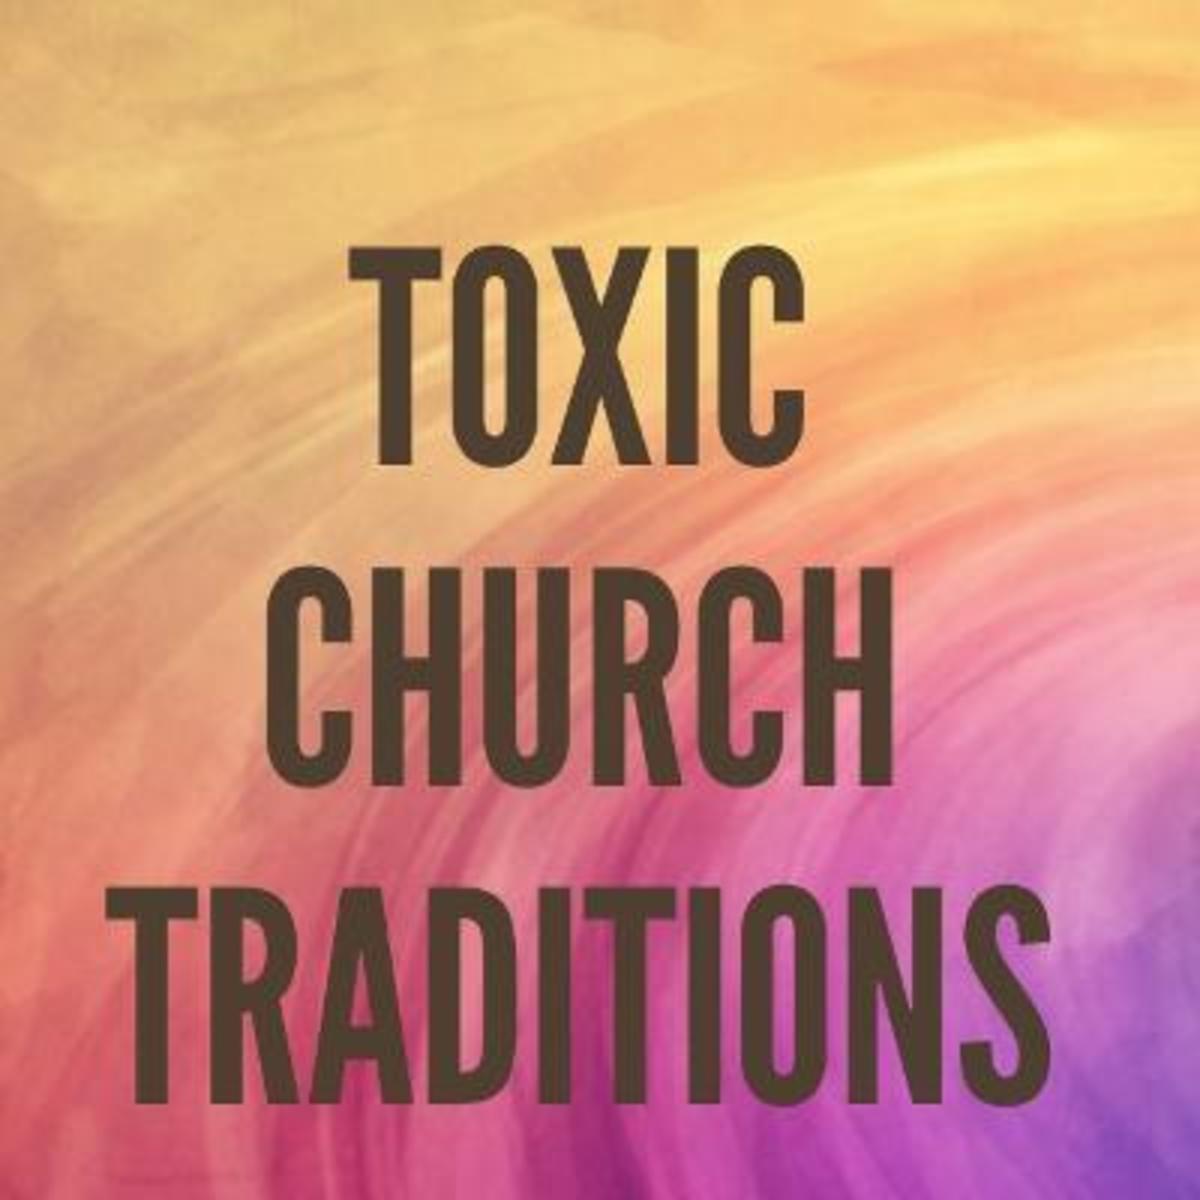 Toxic Traditions That Are Making the Church Sick